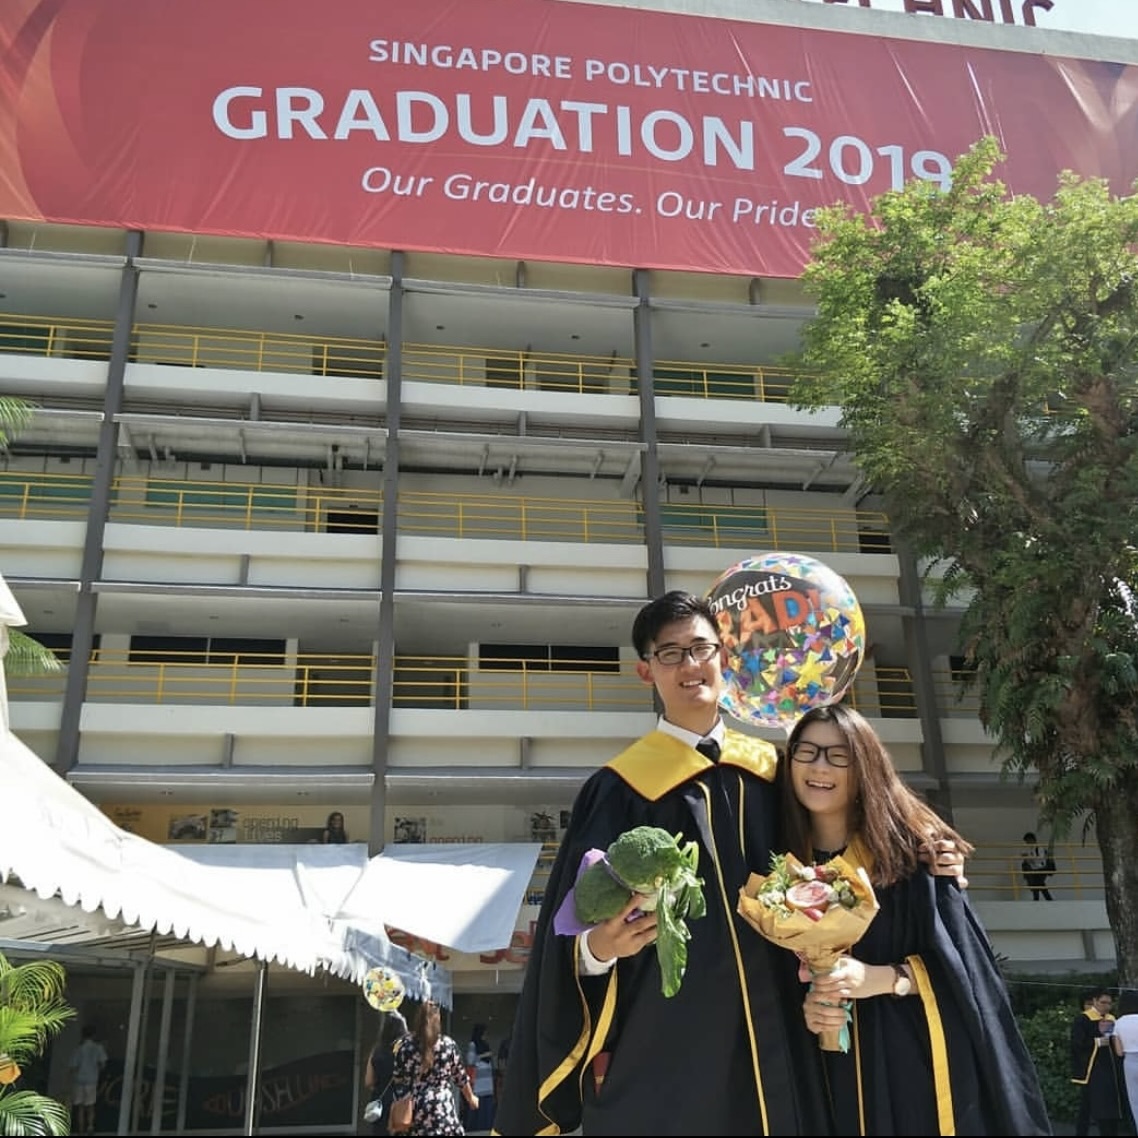 Joe and Jia Yee on their graduation day at SIngapore Polytechnic (SP)